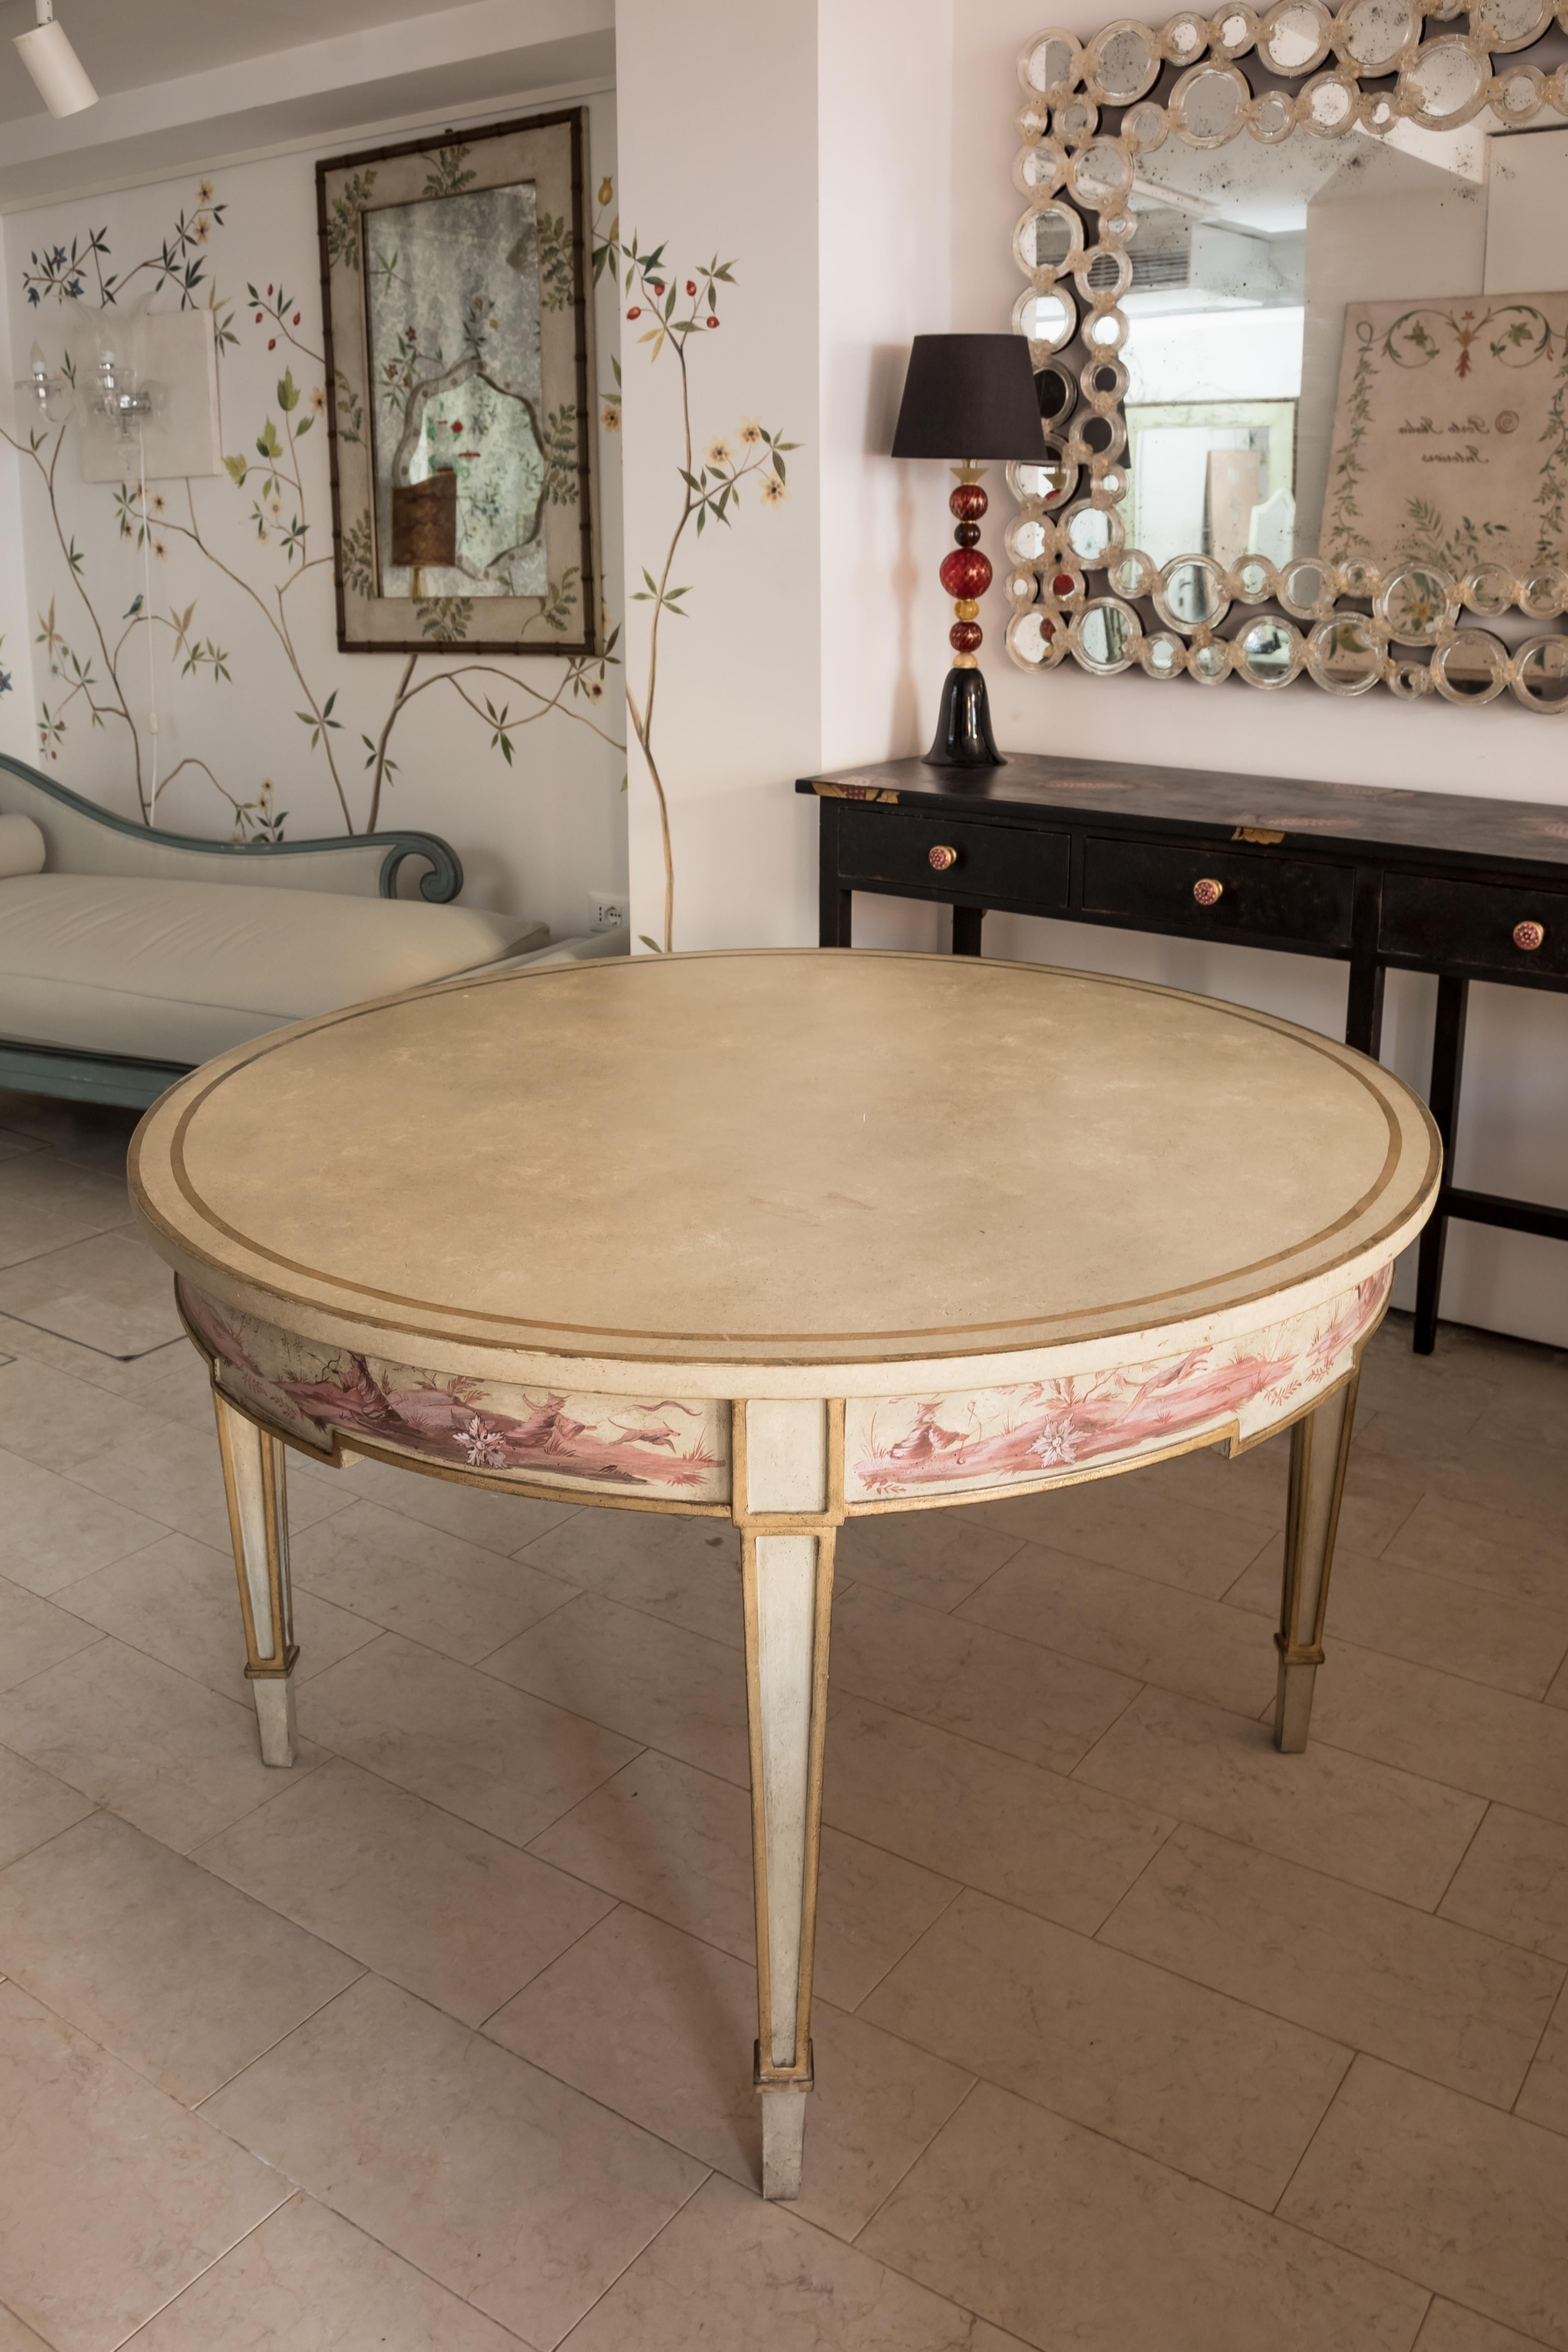 From our Hand-Painted Furniture Collection, we are pleased to introduce you to our Apple Green Manin Table.
A beautiful creation made with one of Venice most representative decor: a detailed chinoiserie, in Fuchsia tones, in contrast with the